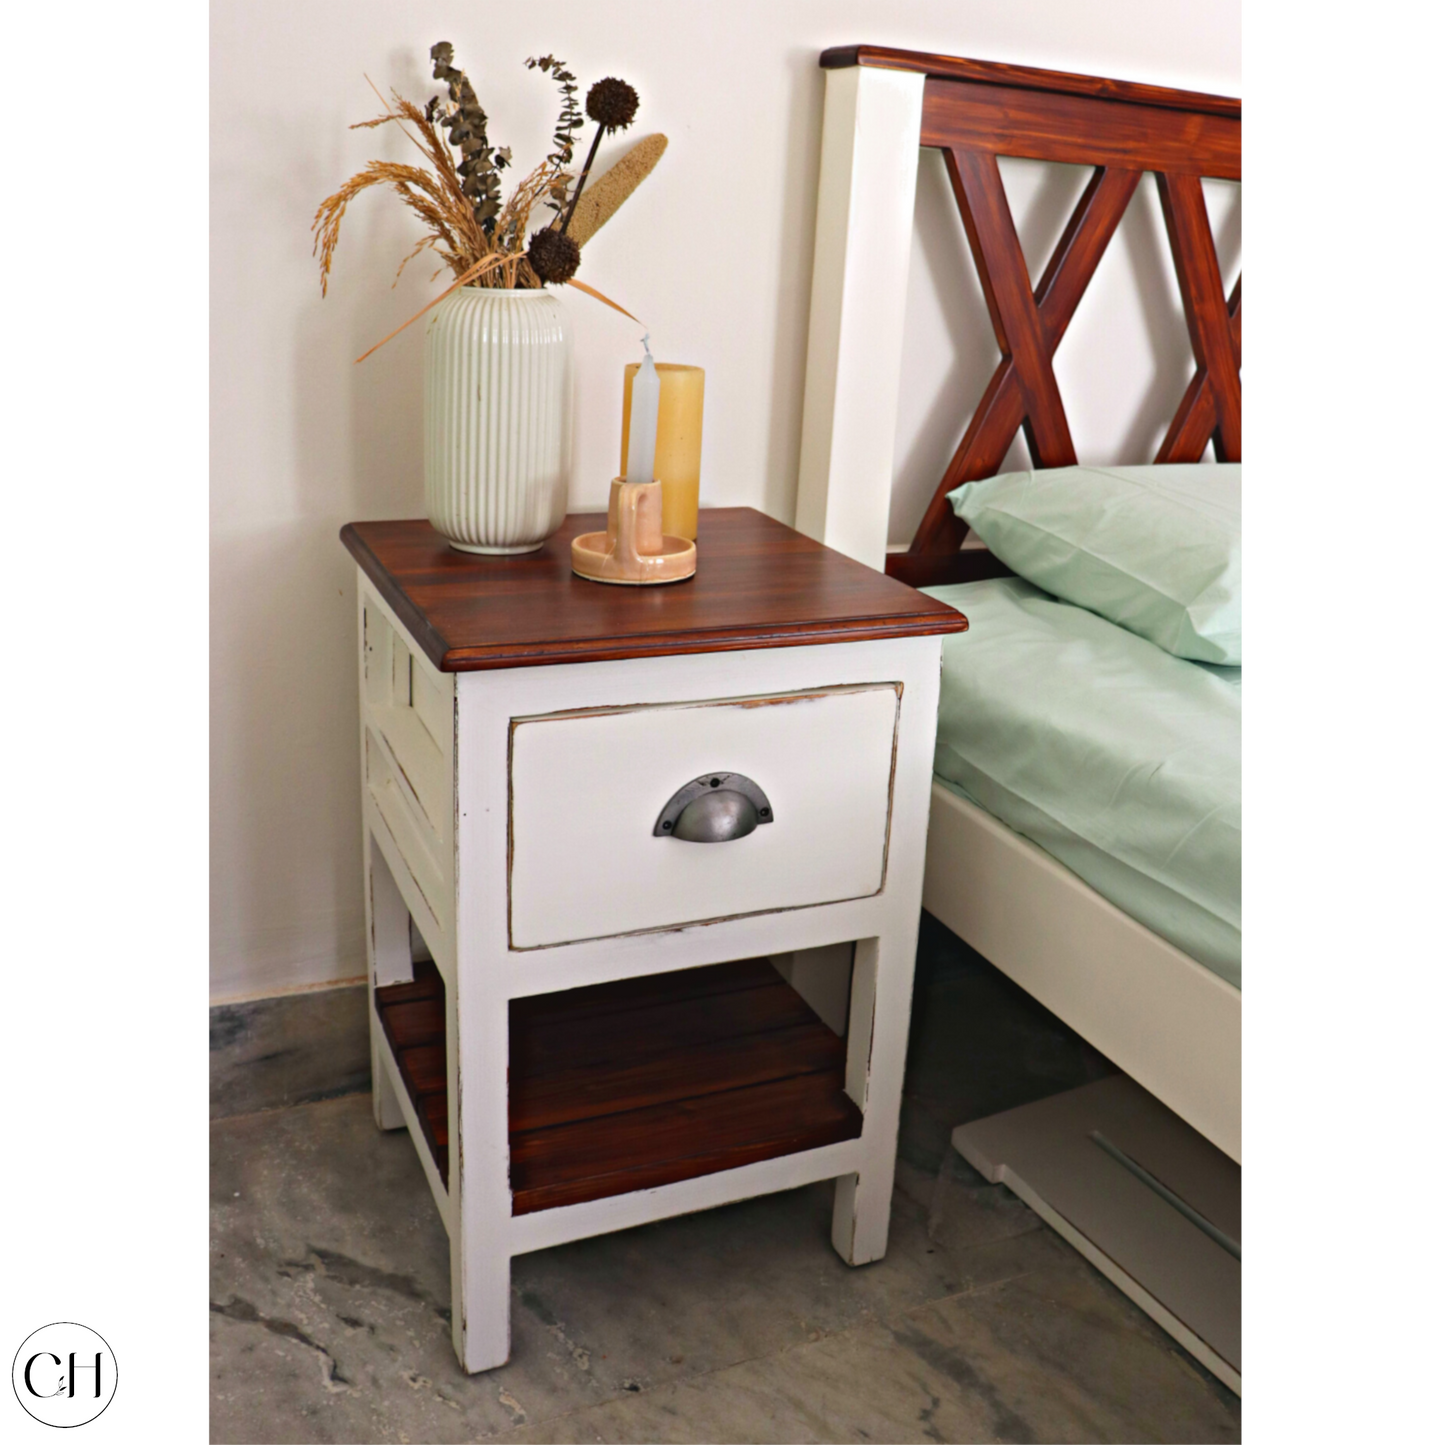 CustHum-Devon-farmhouse style side table in two-tone finish, distressed white and wood (with props)